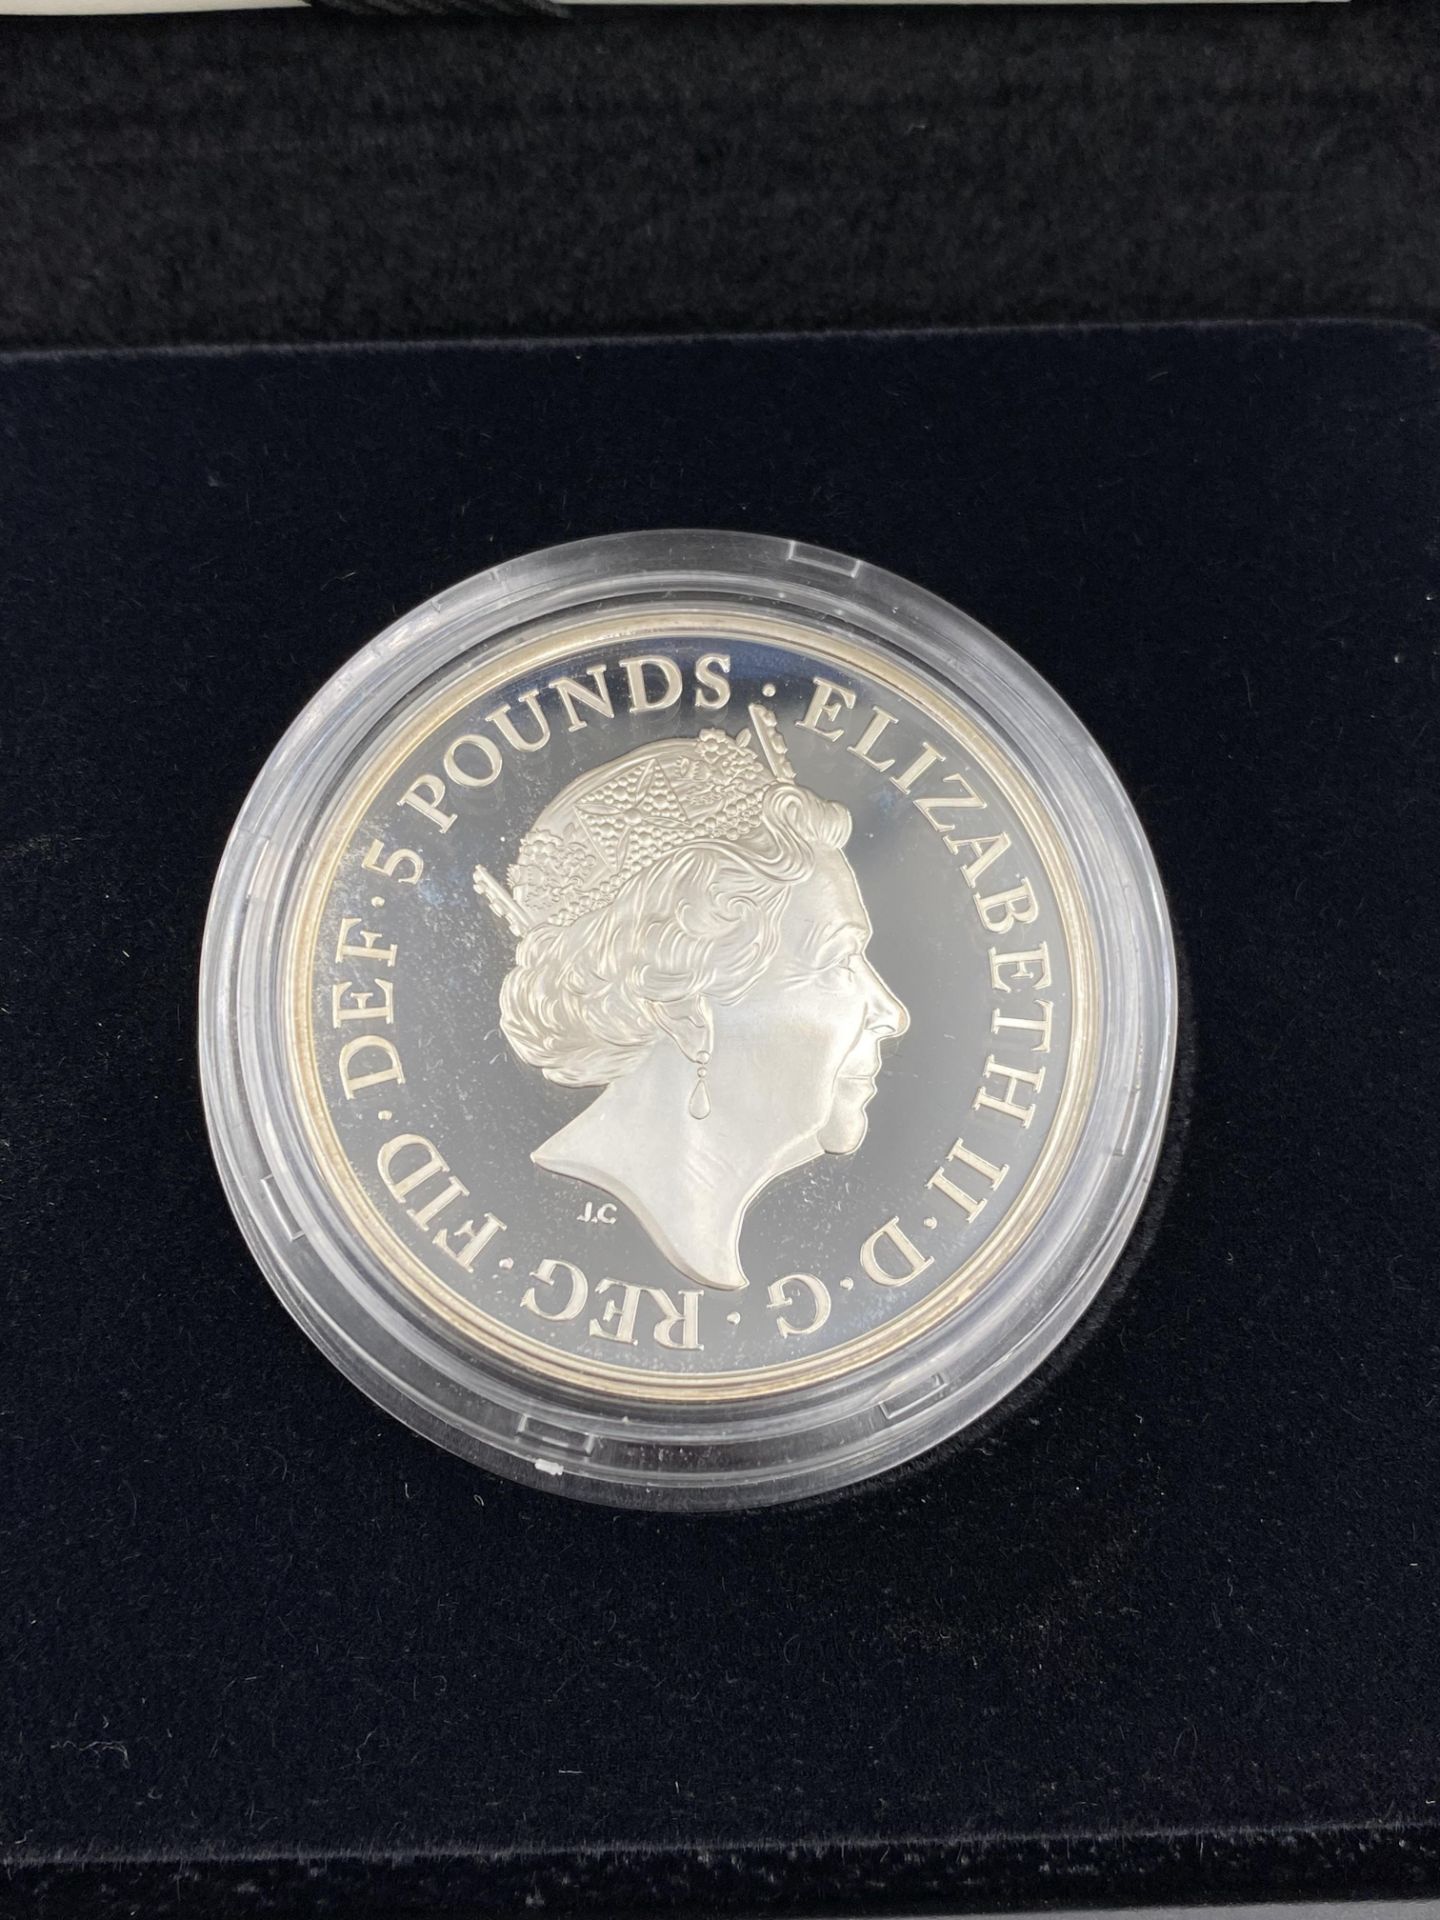 Royal Mint Centenary of the House of Windsor £5 silver proof coin - Image 4 of 4